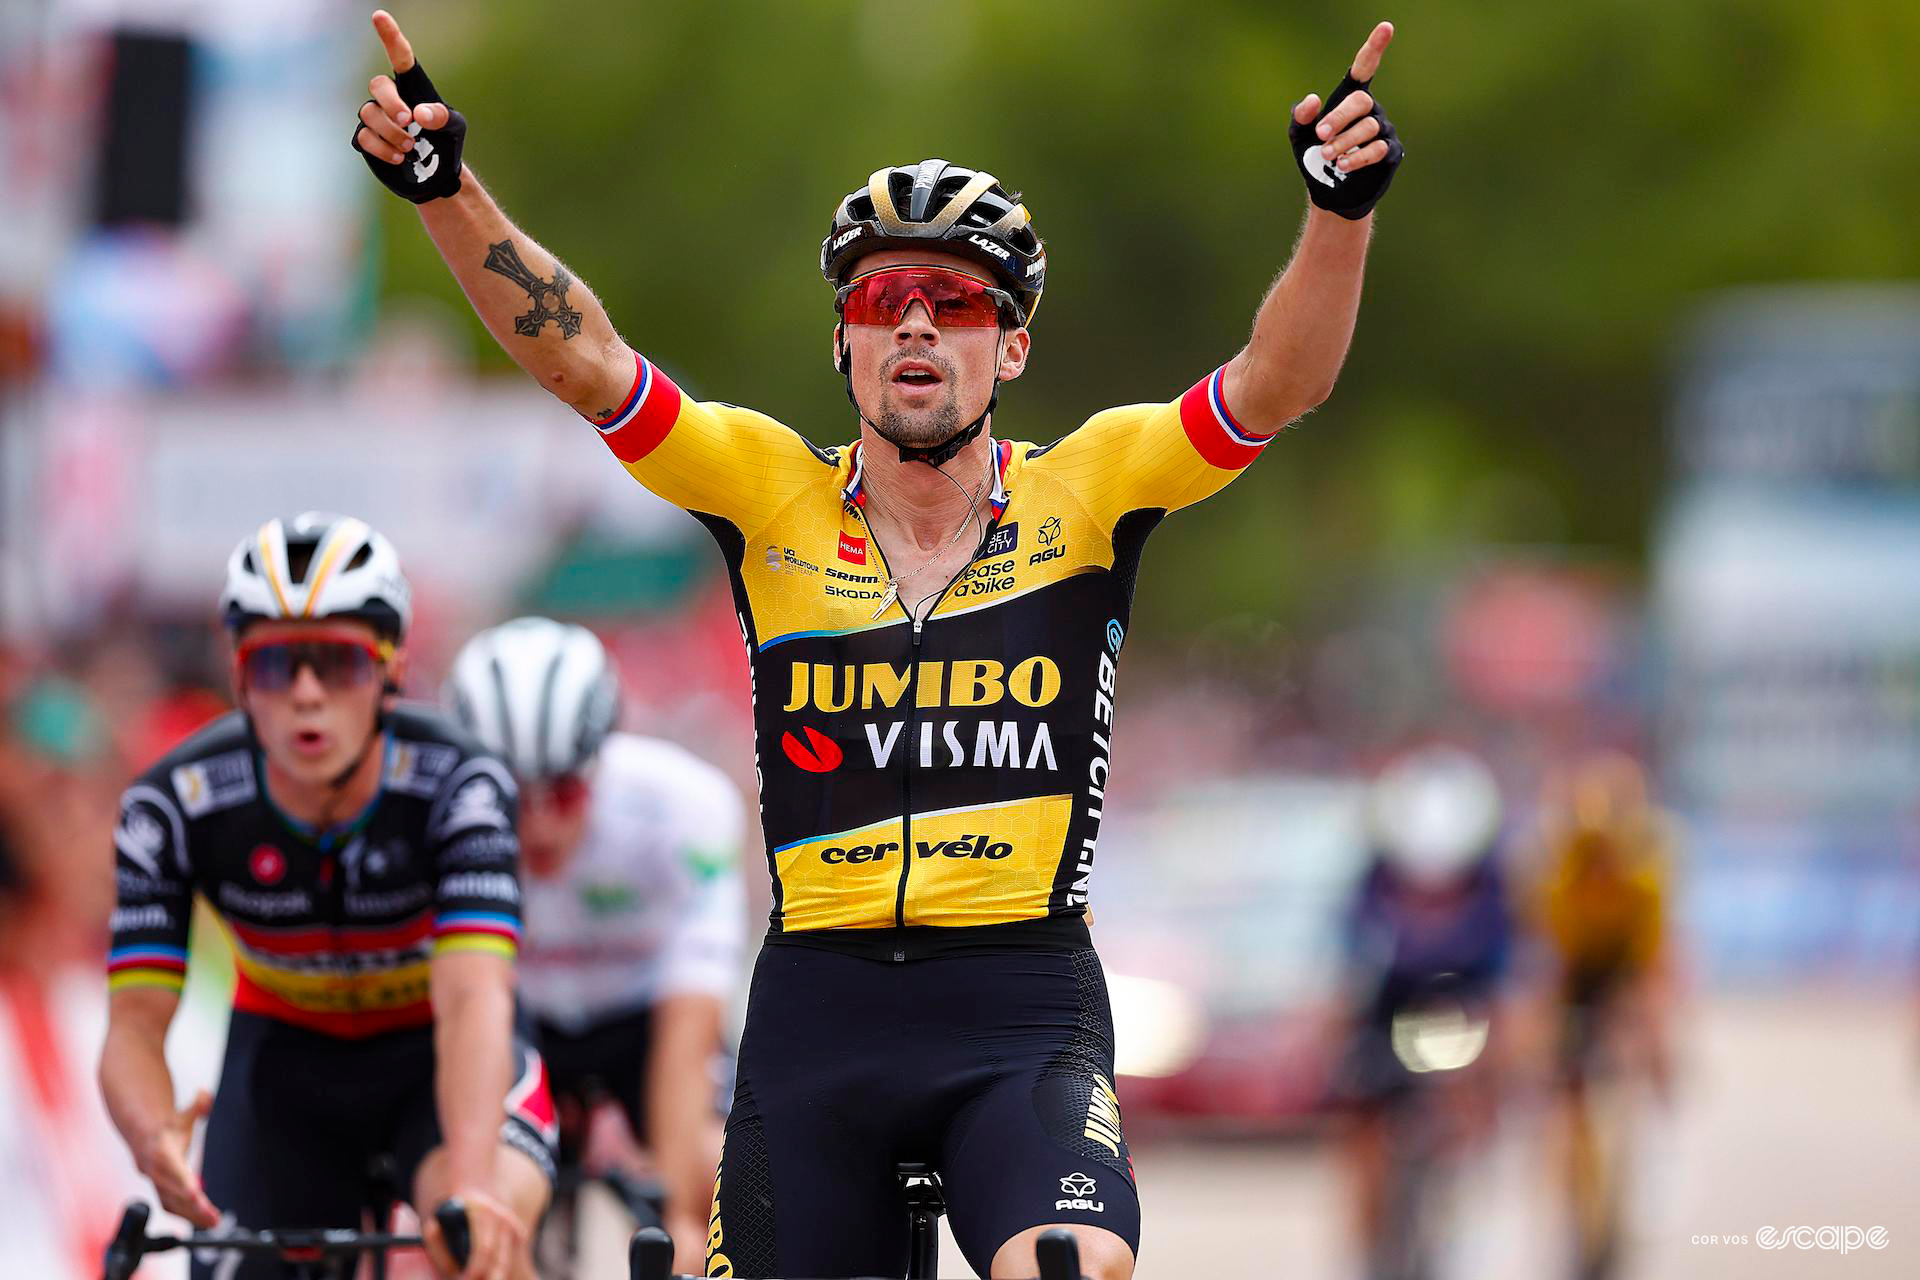 Vuelta a España stage 8 report: Jumbo-Visma take stage and red jersey ...